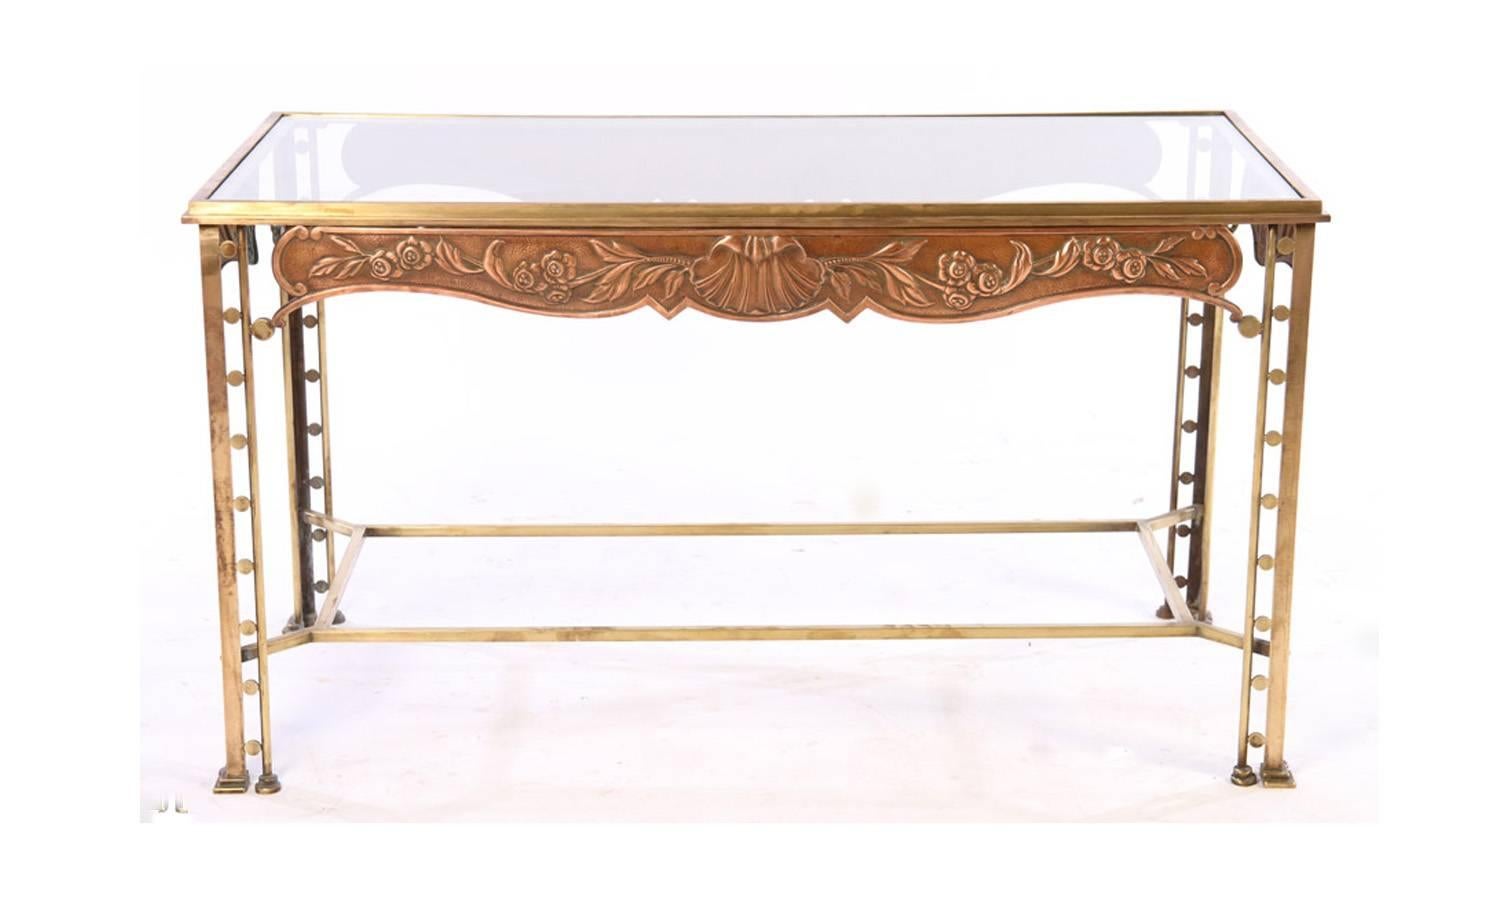 Art Deco Bronze Side Table with Art Deco Six-Arm Glass Ball Copper Chandelier For Sale 3